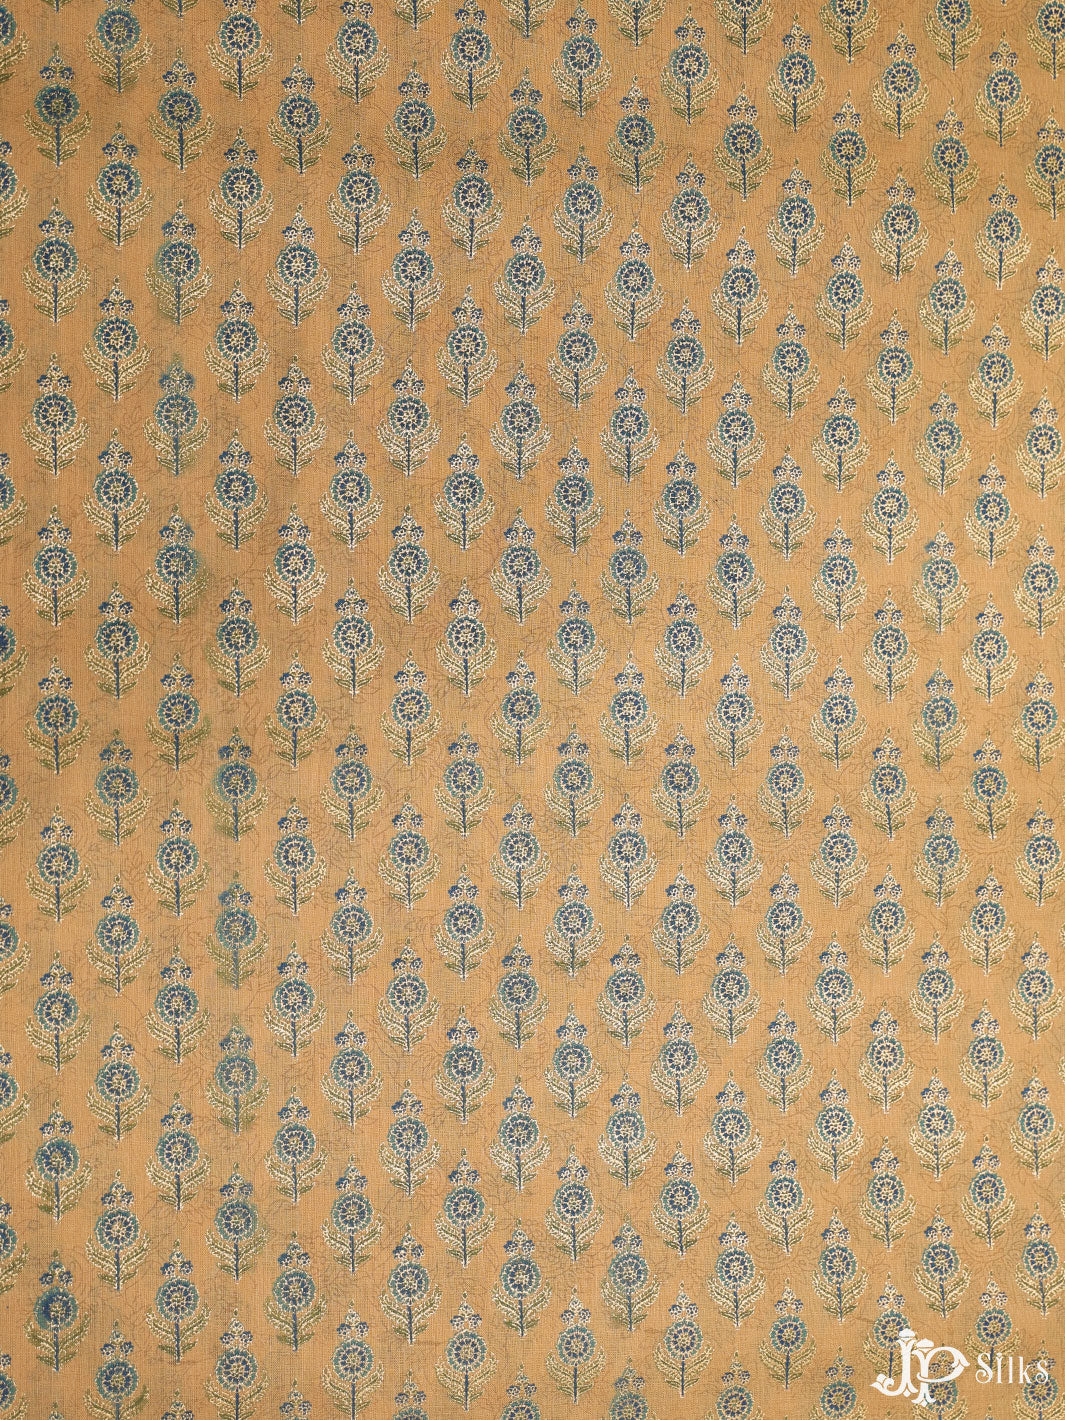 Dark Beige and Ink Blue Cotton Fabric - A7192 - View 1